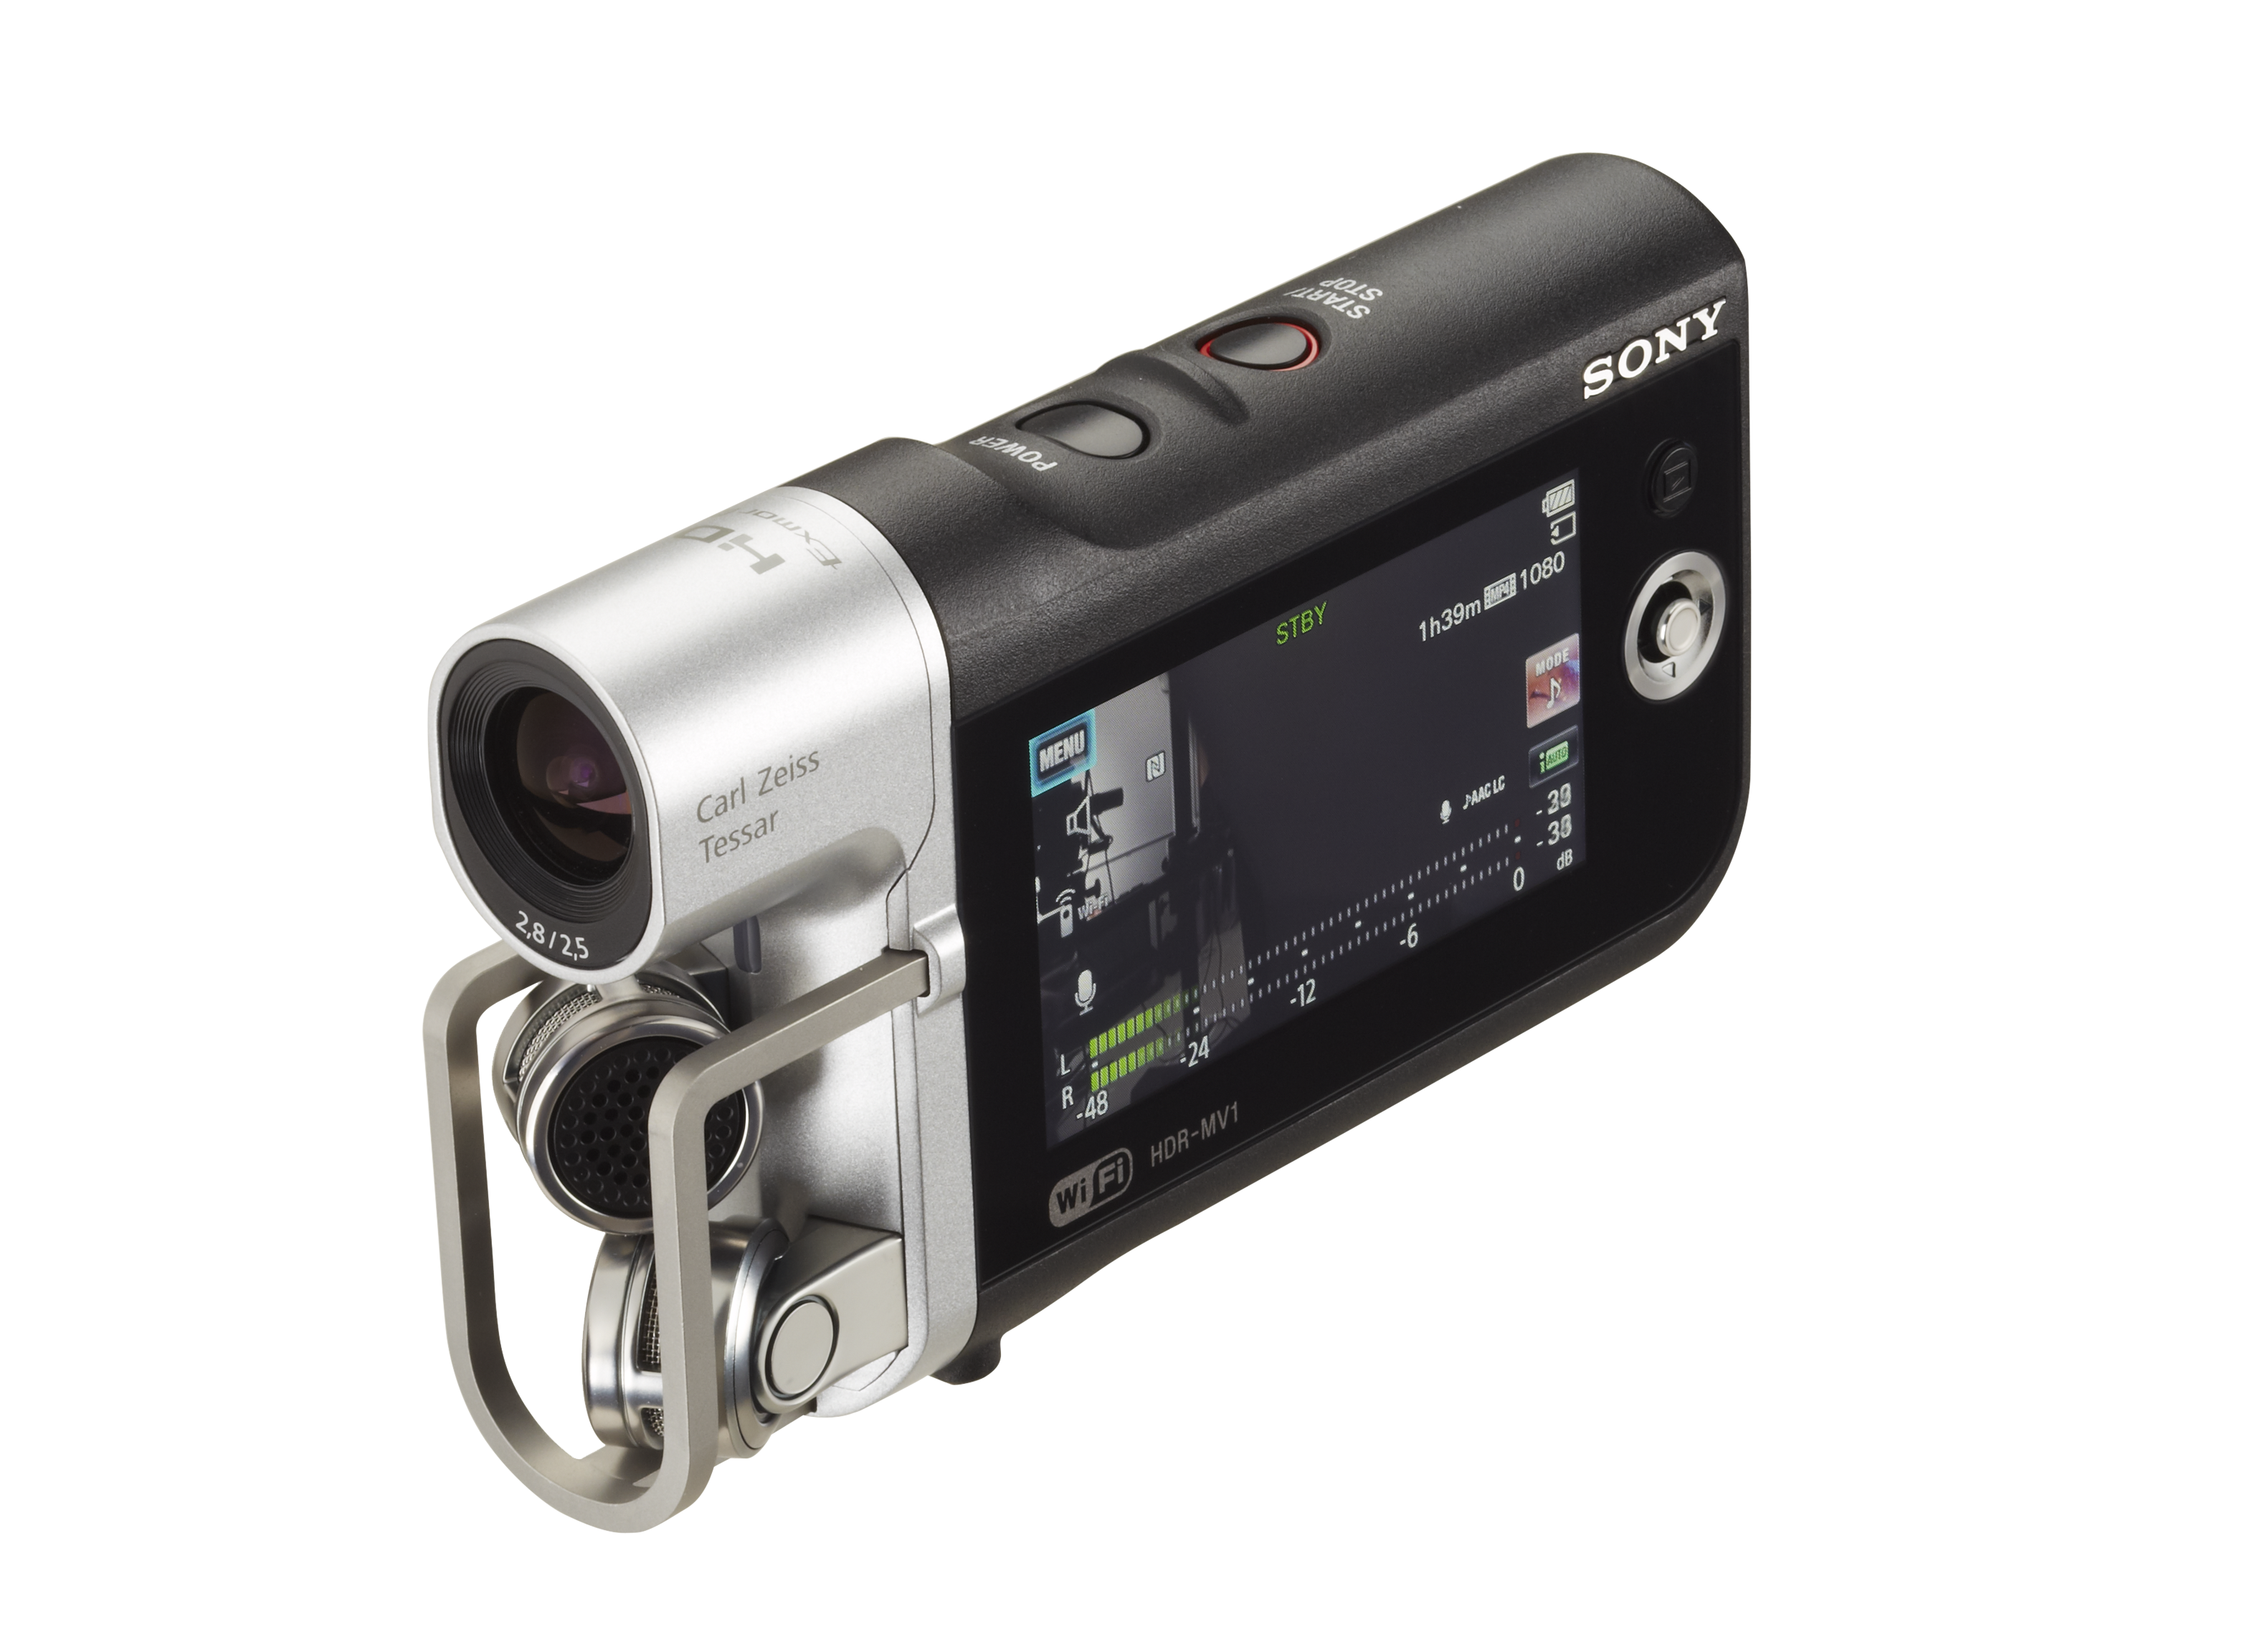 Sony HDR-MV1 Camcorder Review - Consumer Reports